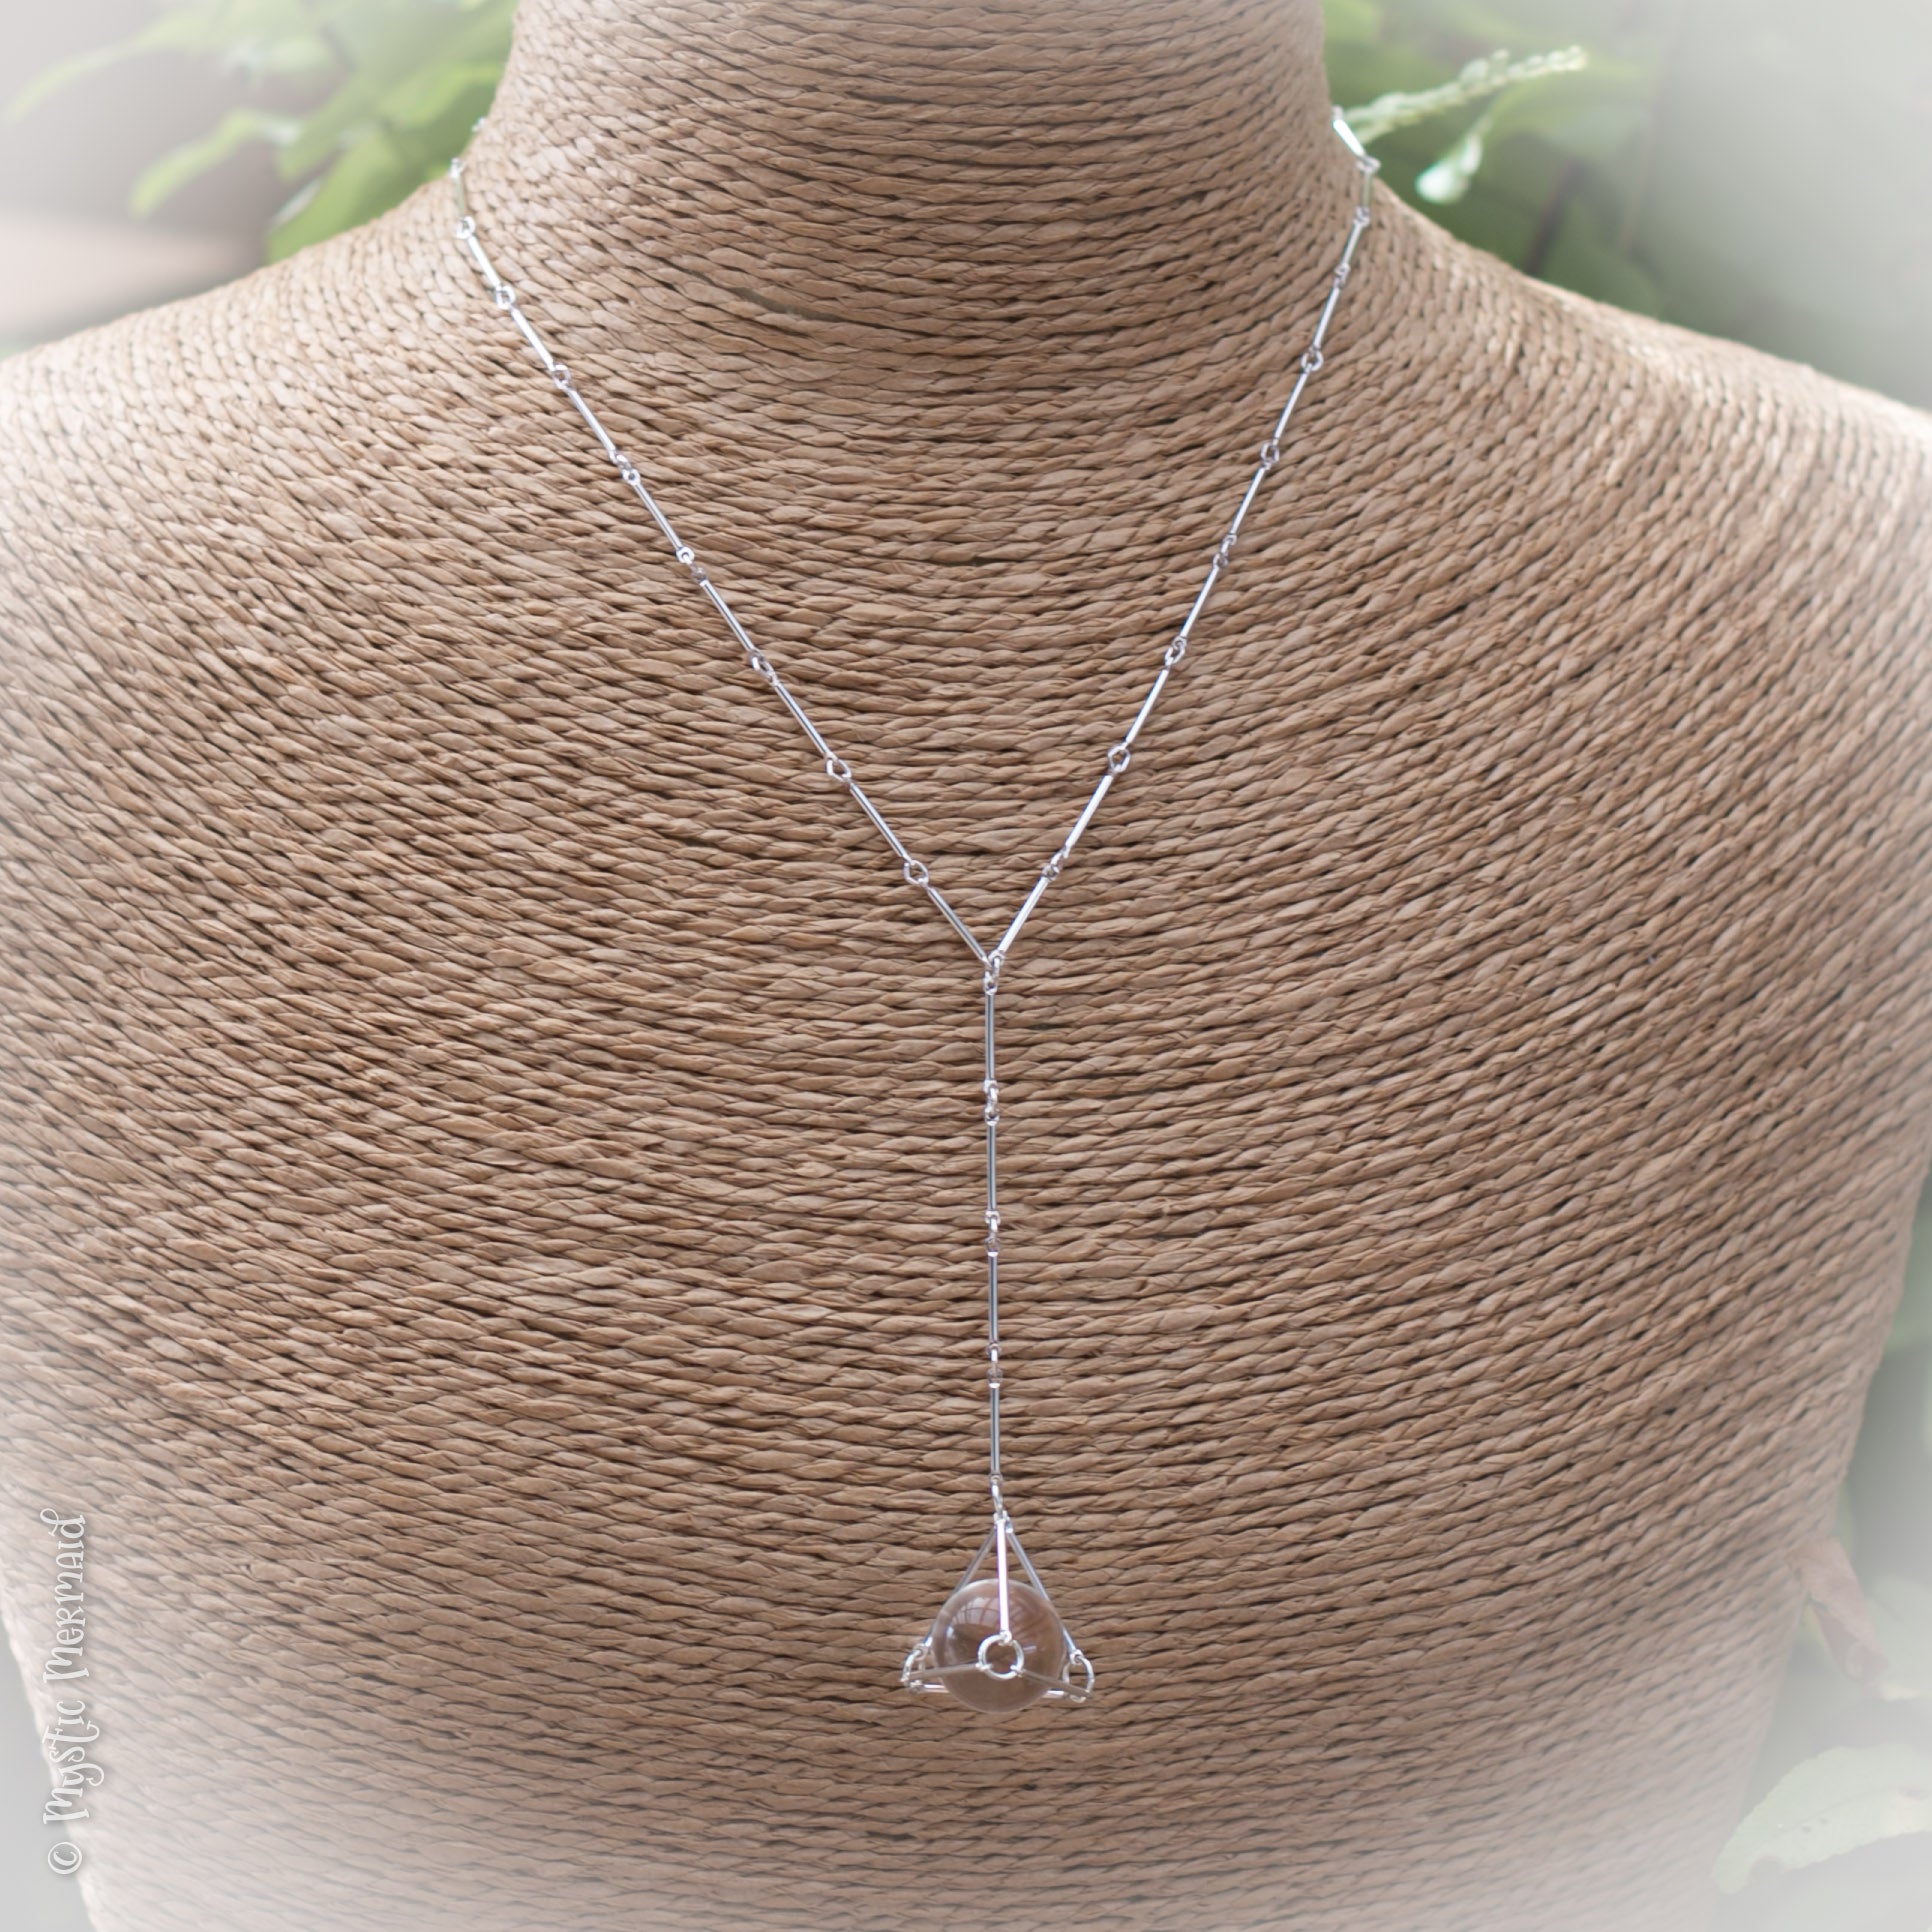 Quartz Crystal Sphere Sacred Geometry Sterling silver necklace